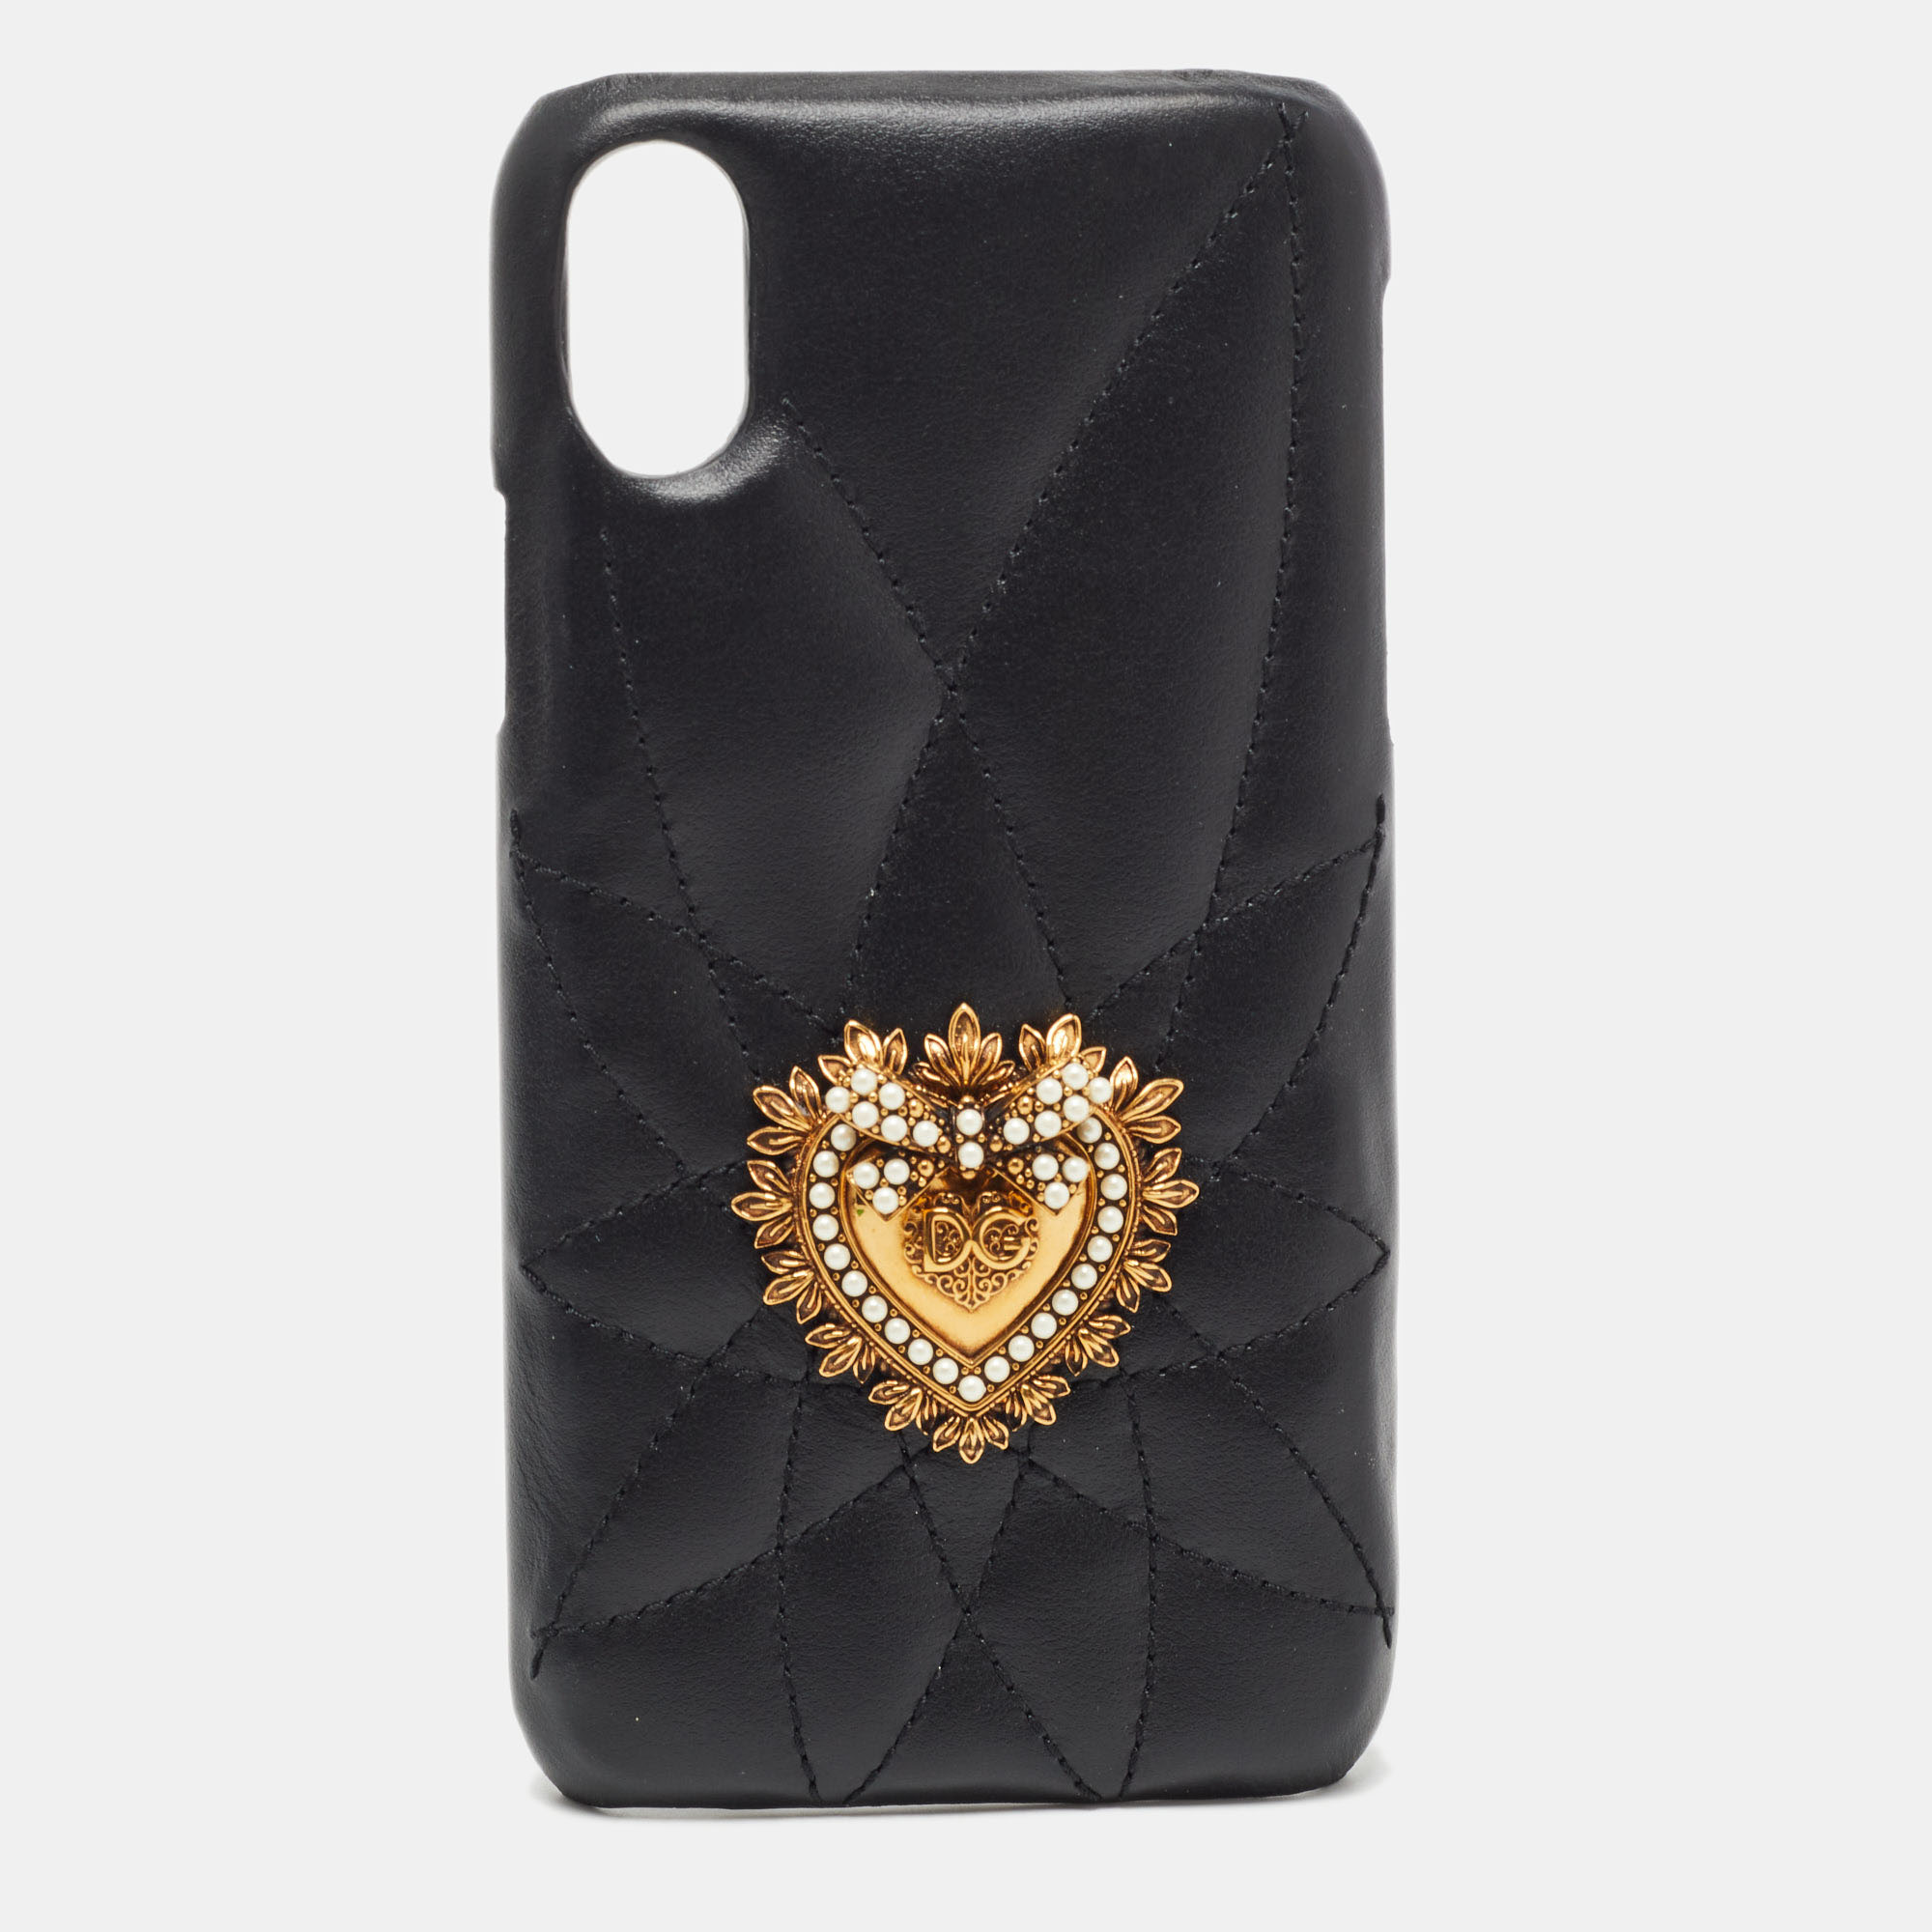 Dolce & gabbana black quilted leather sacred heart iphone x case